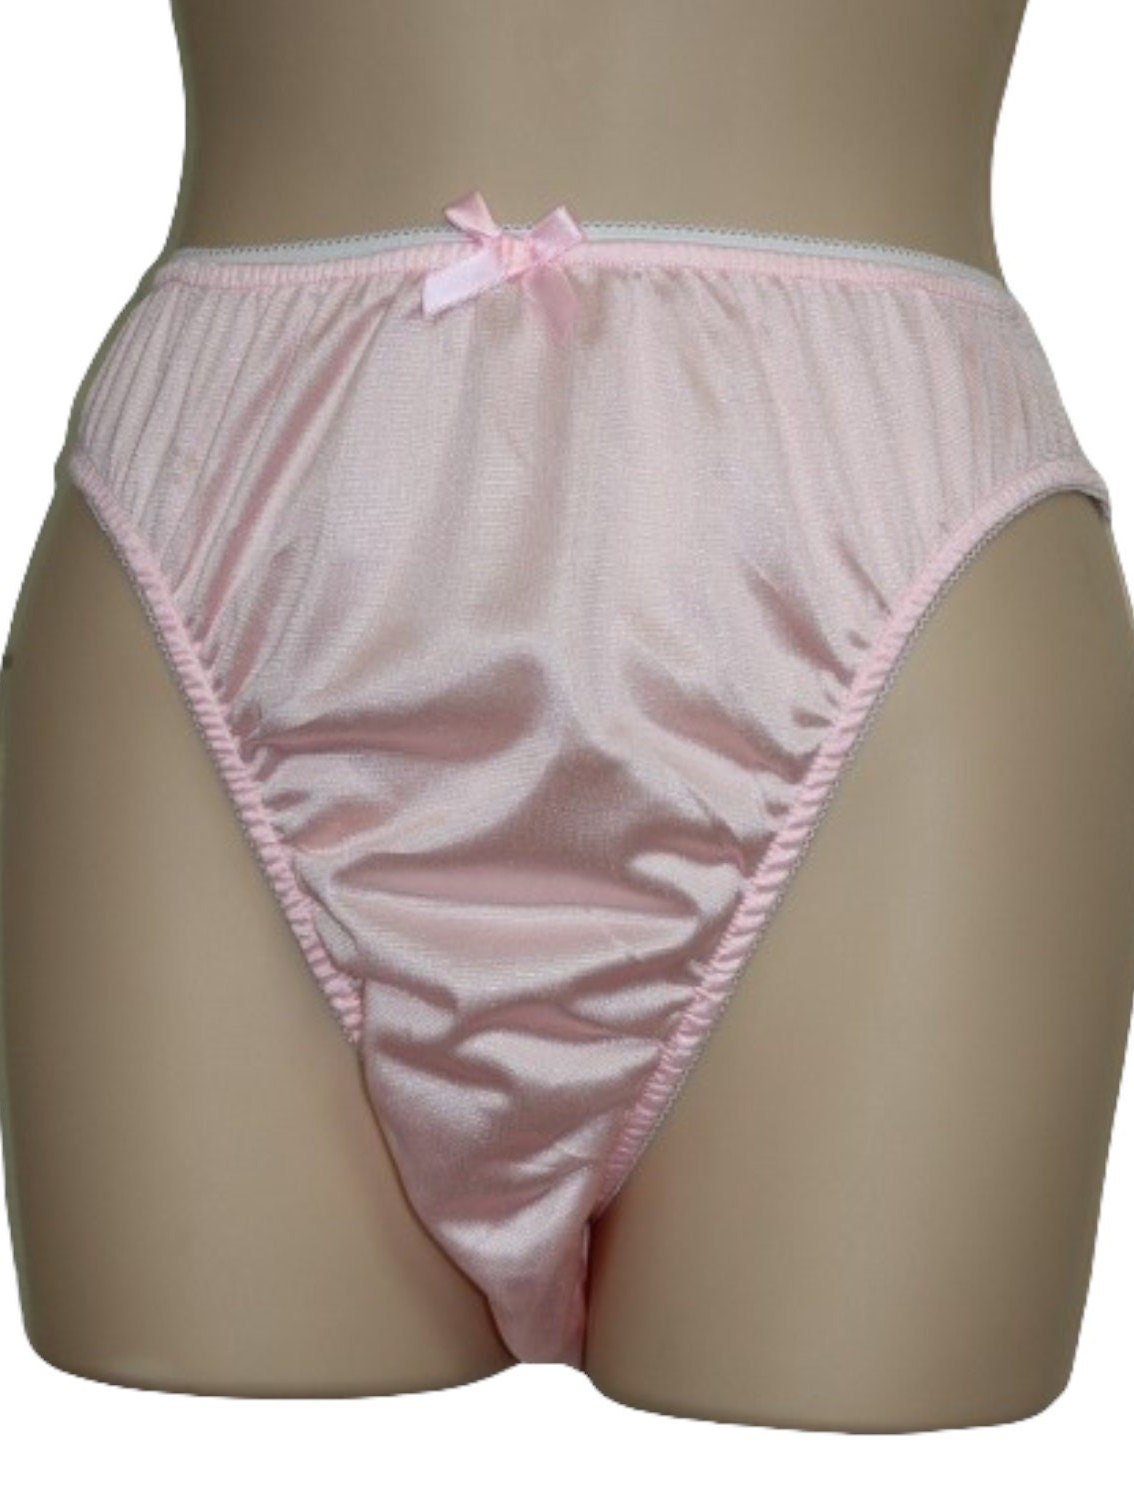 SALE PINK NYLON TRICOT French Cut Wider Crotch PANTIES * ENCASED * 26 -  36